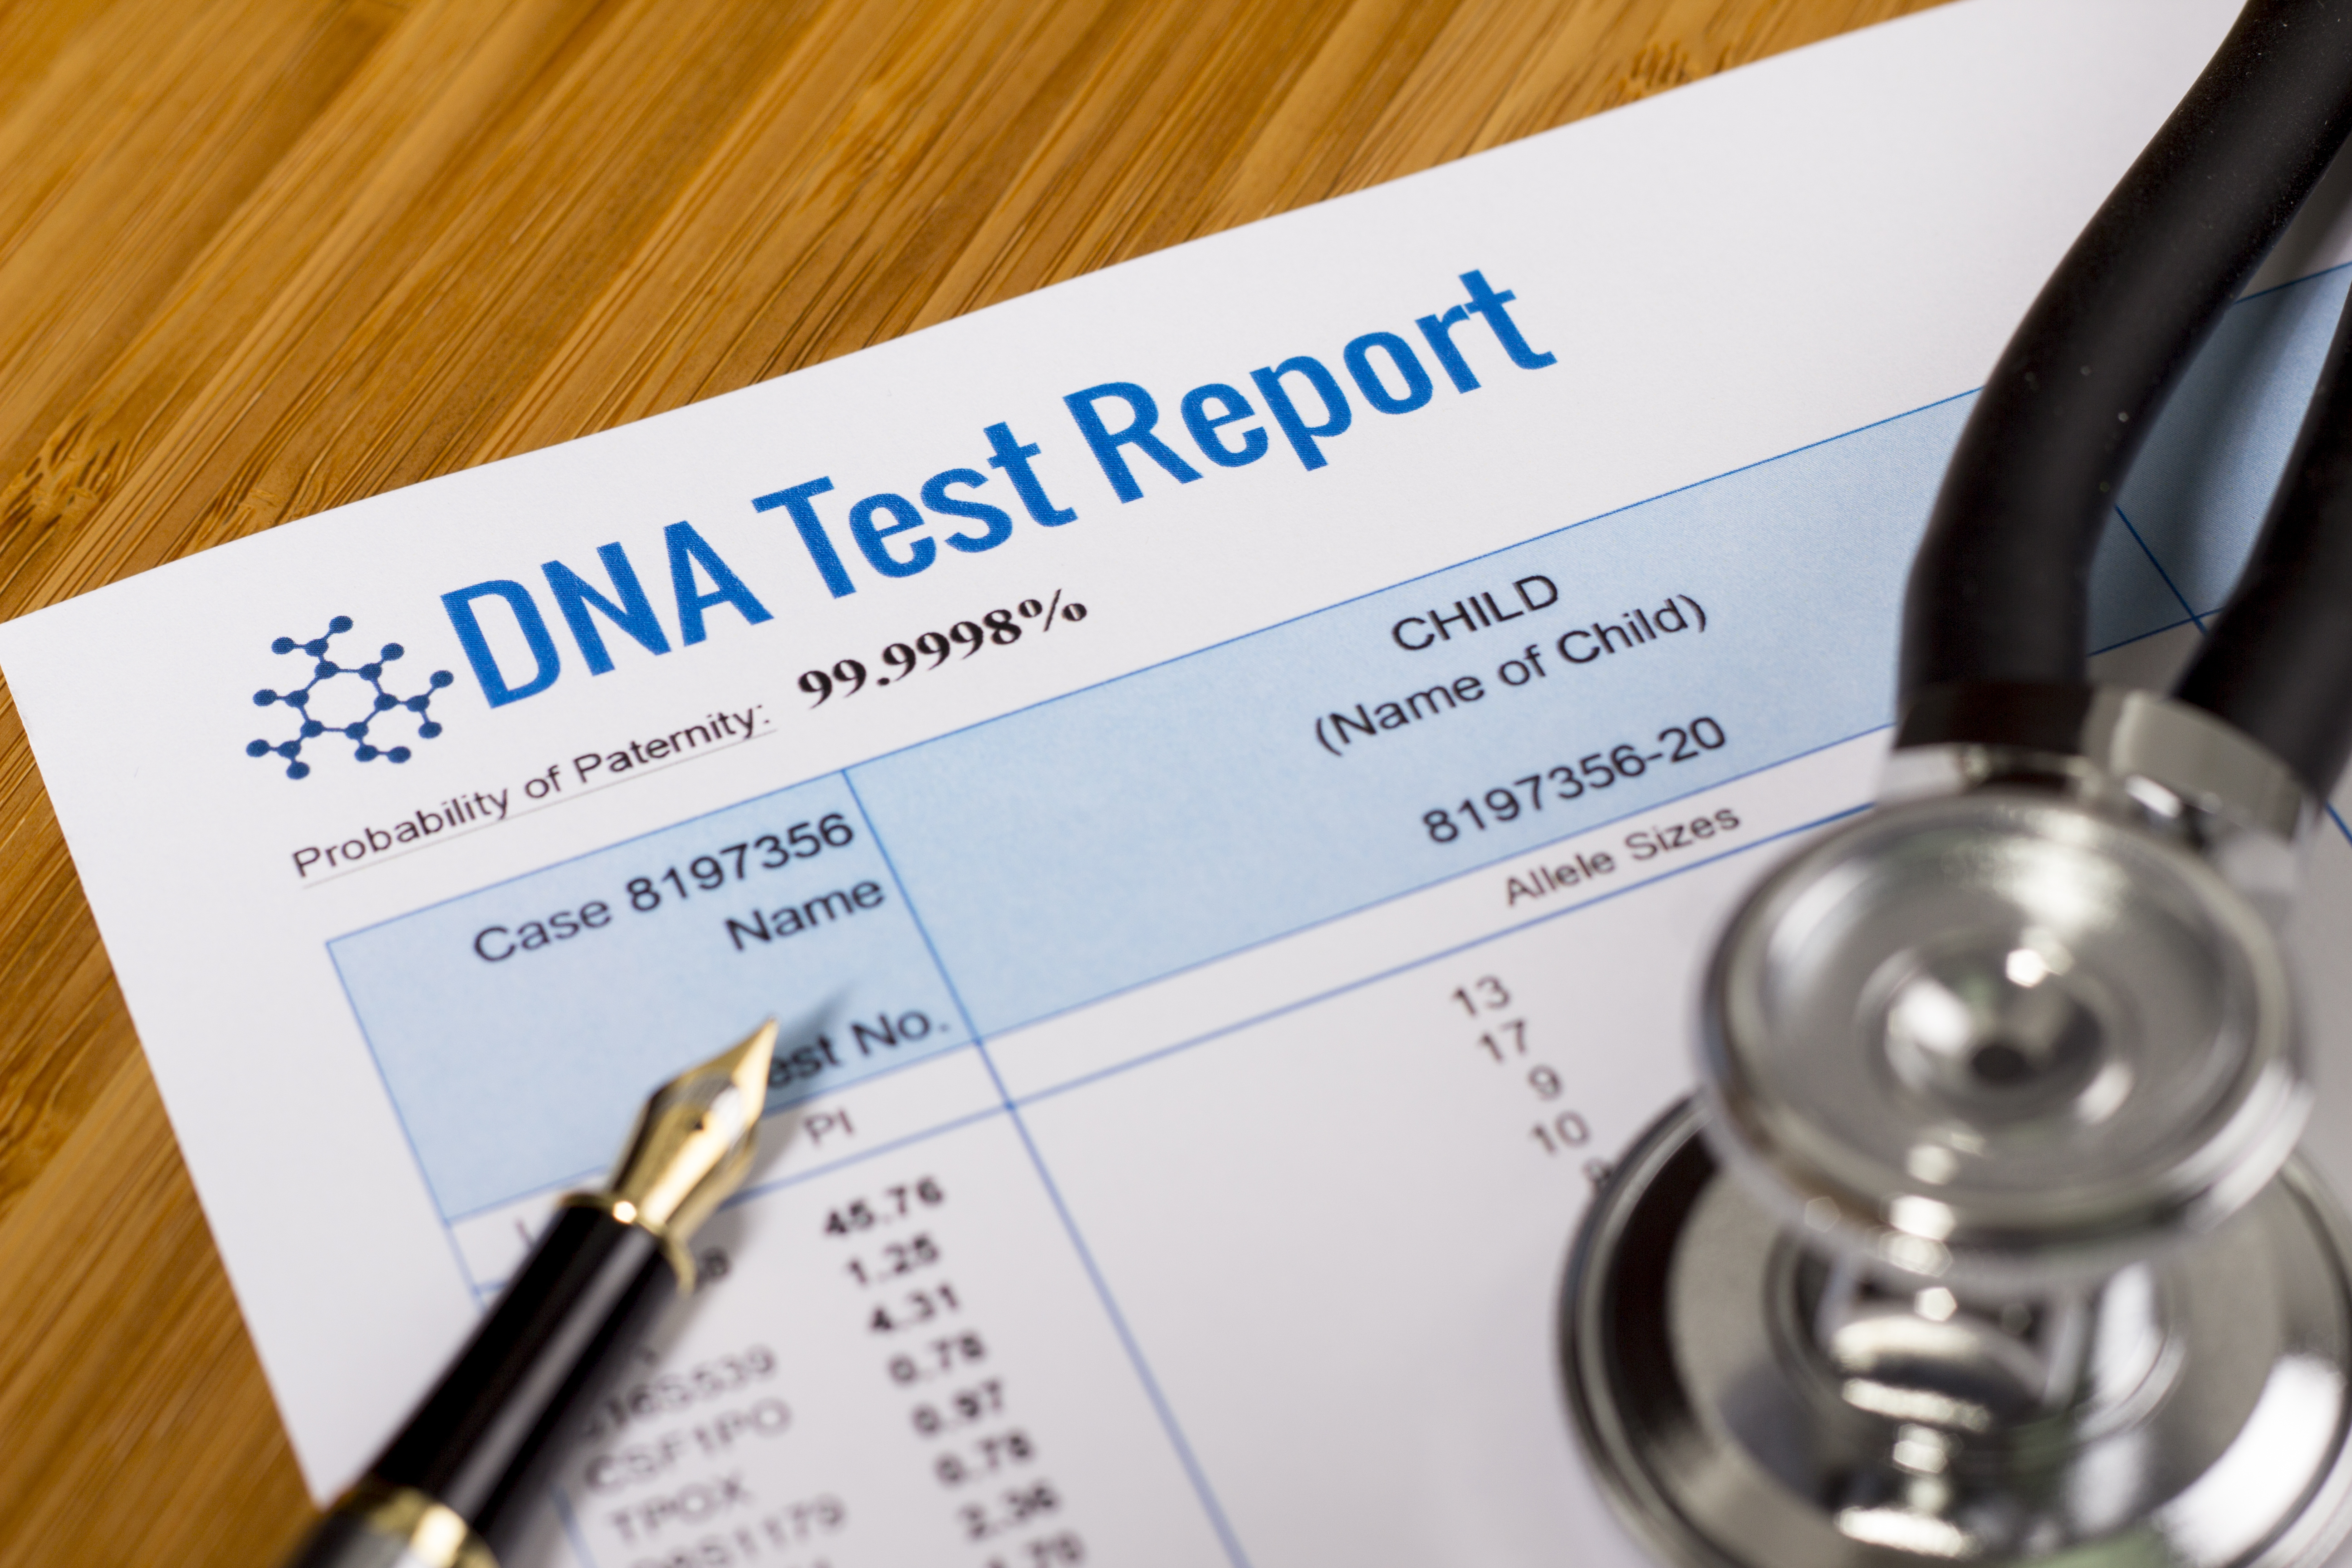 A DNA test report of paternity with a pen and stethoscope. | Source: Shutterstock